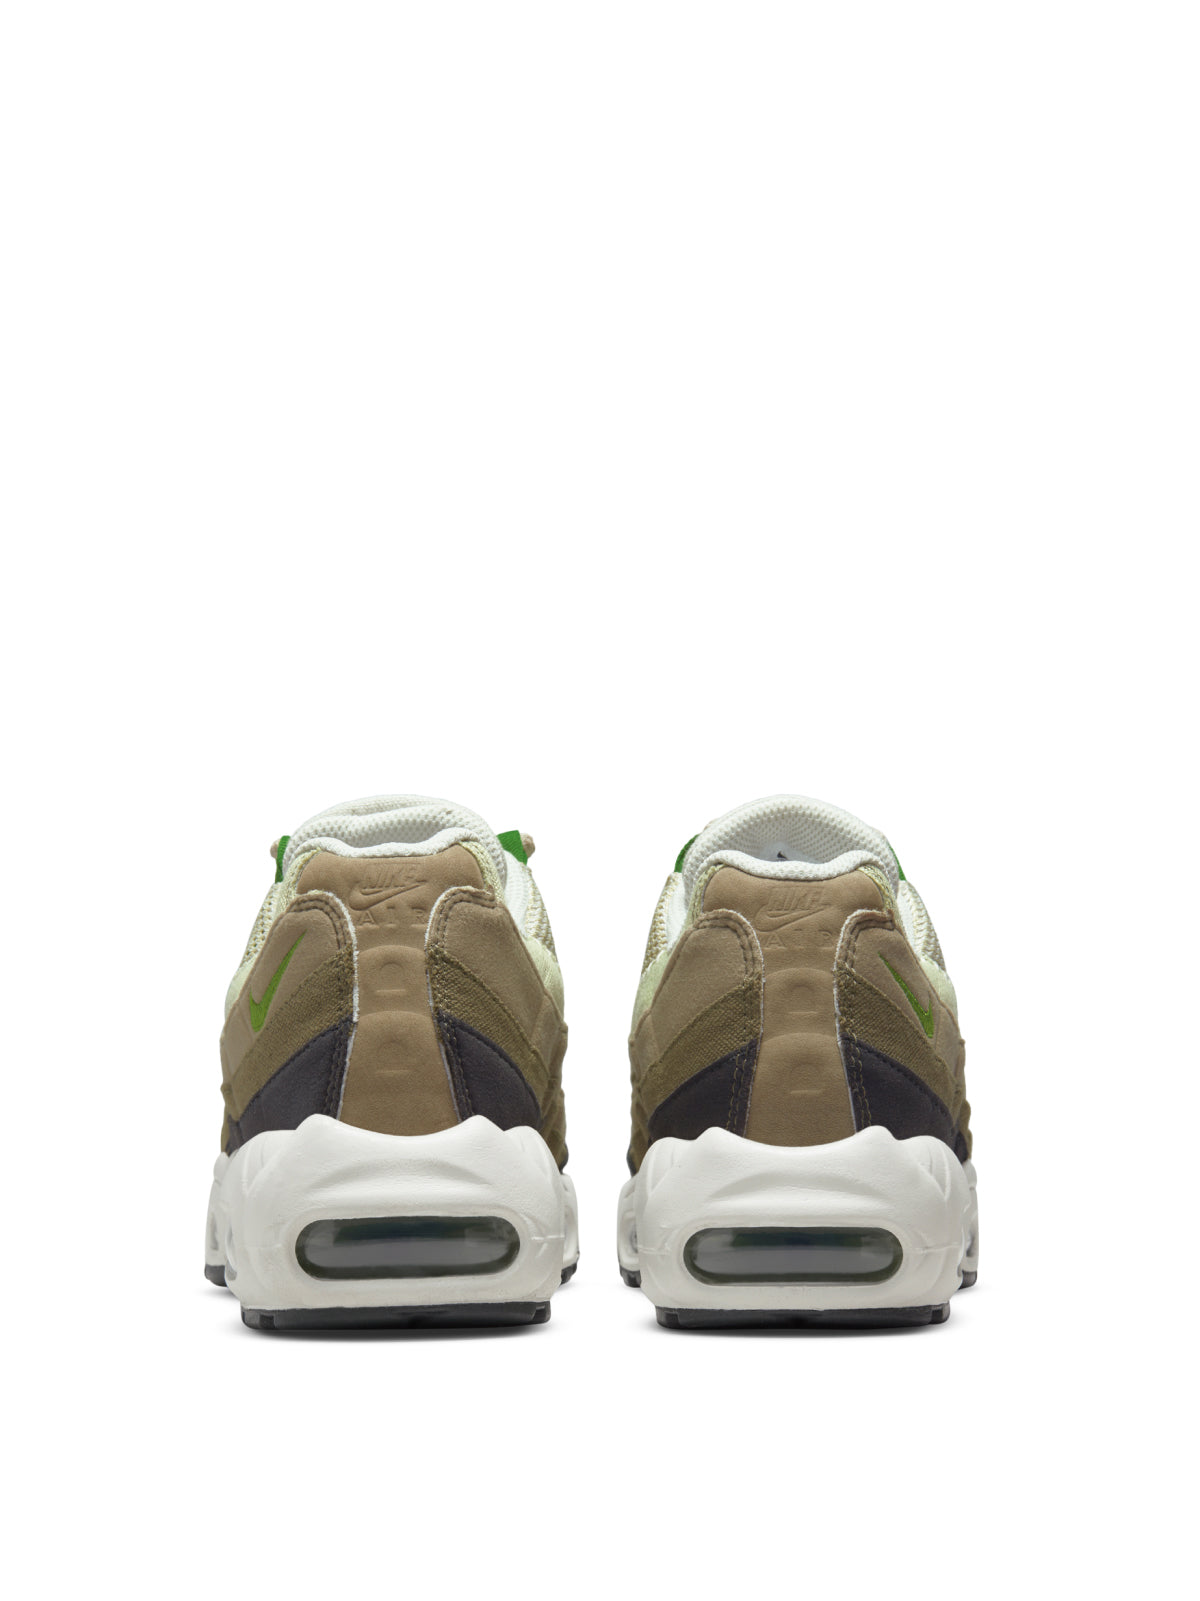 Nike-OUTLET-SALE-Air Max 95 Chlorophyll Sneakers-ARCHIVIST